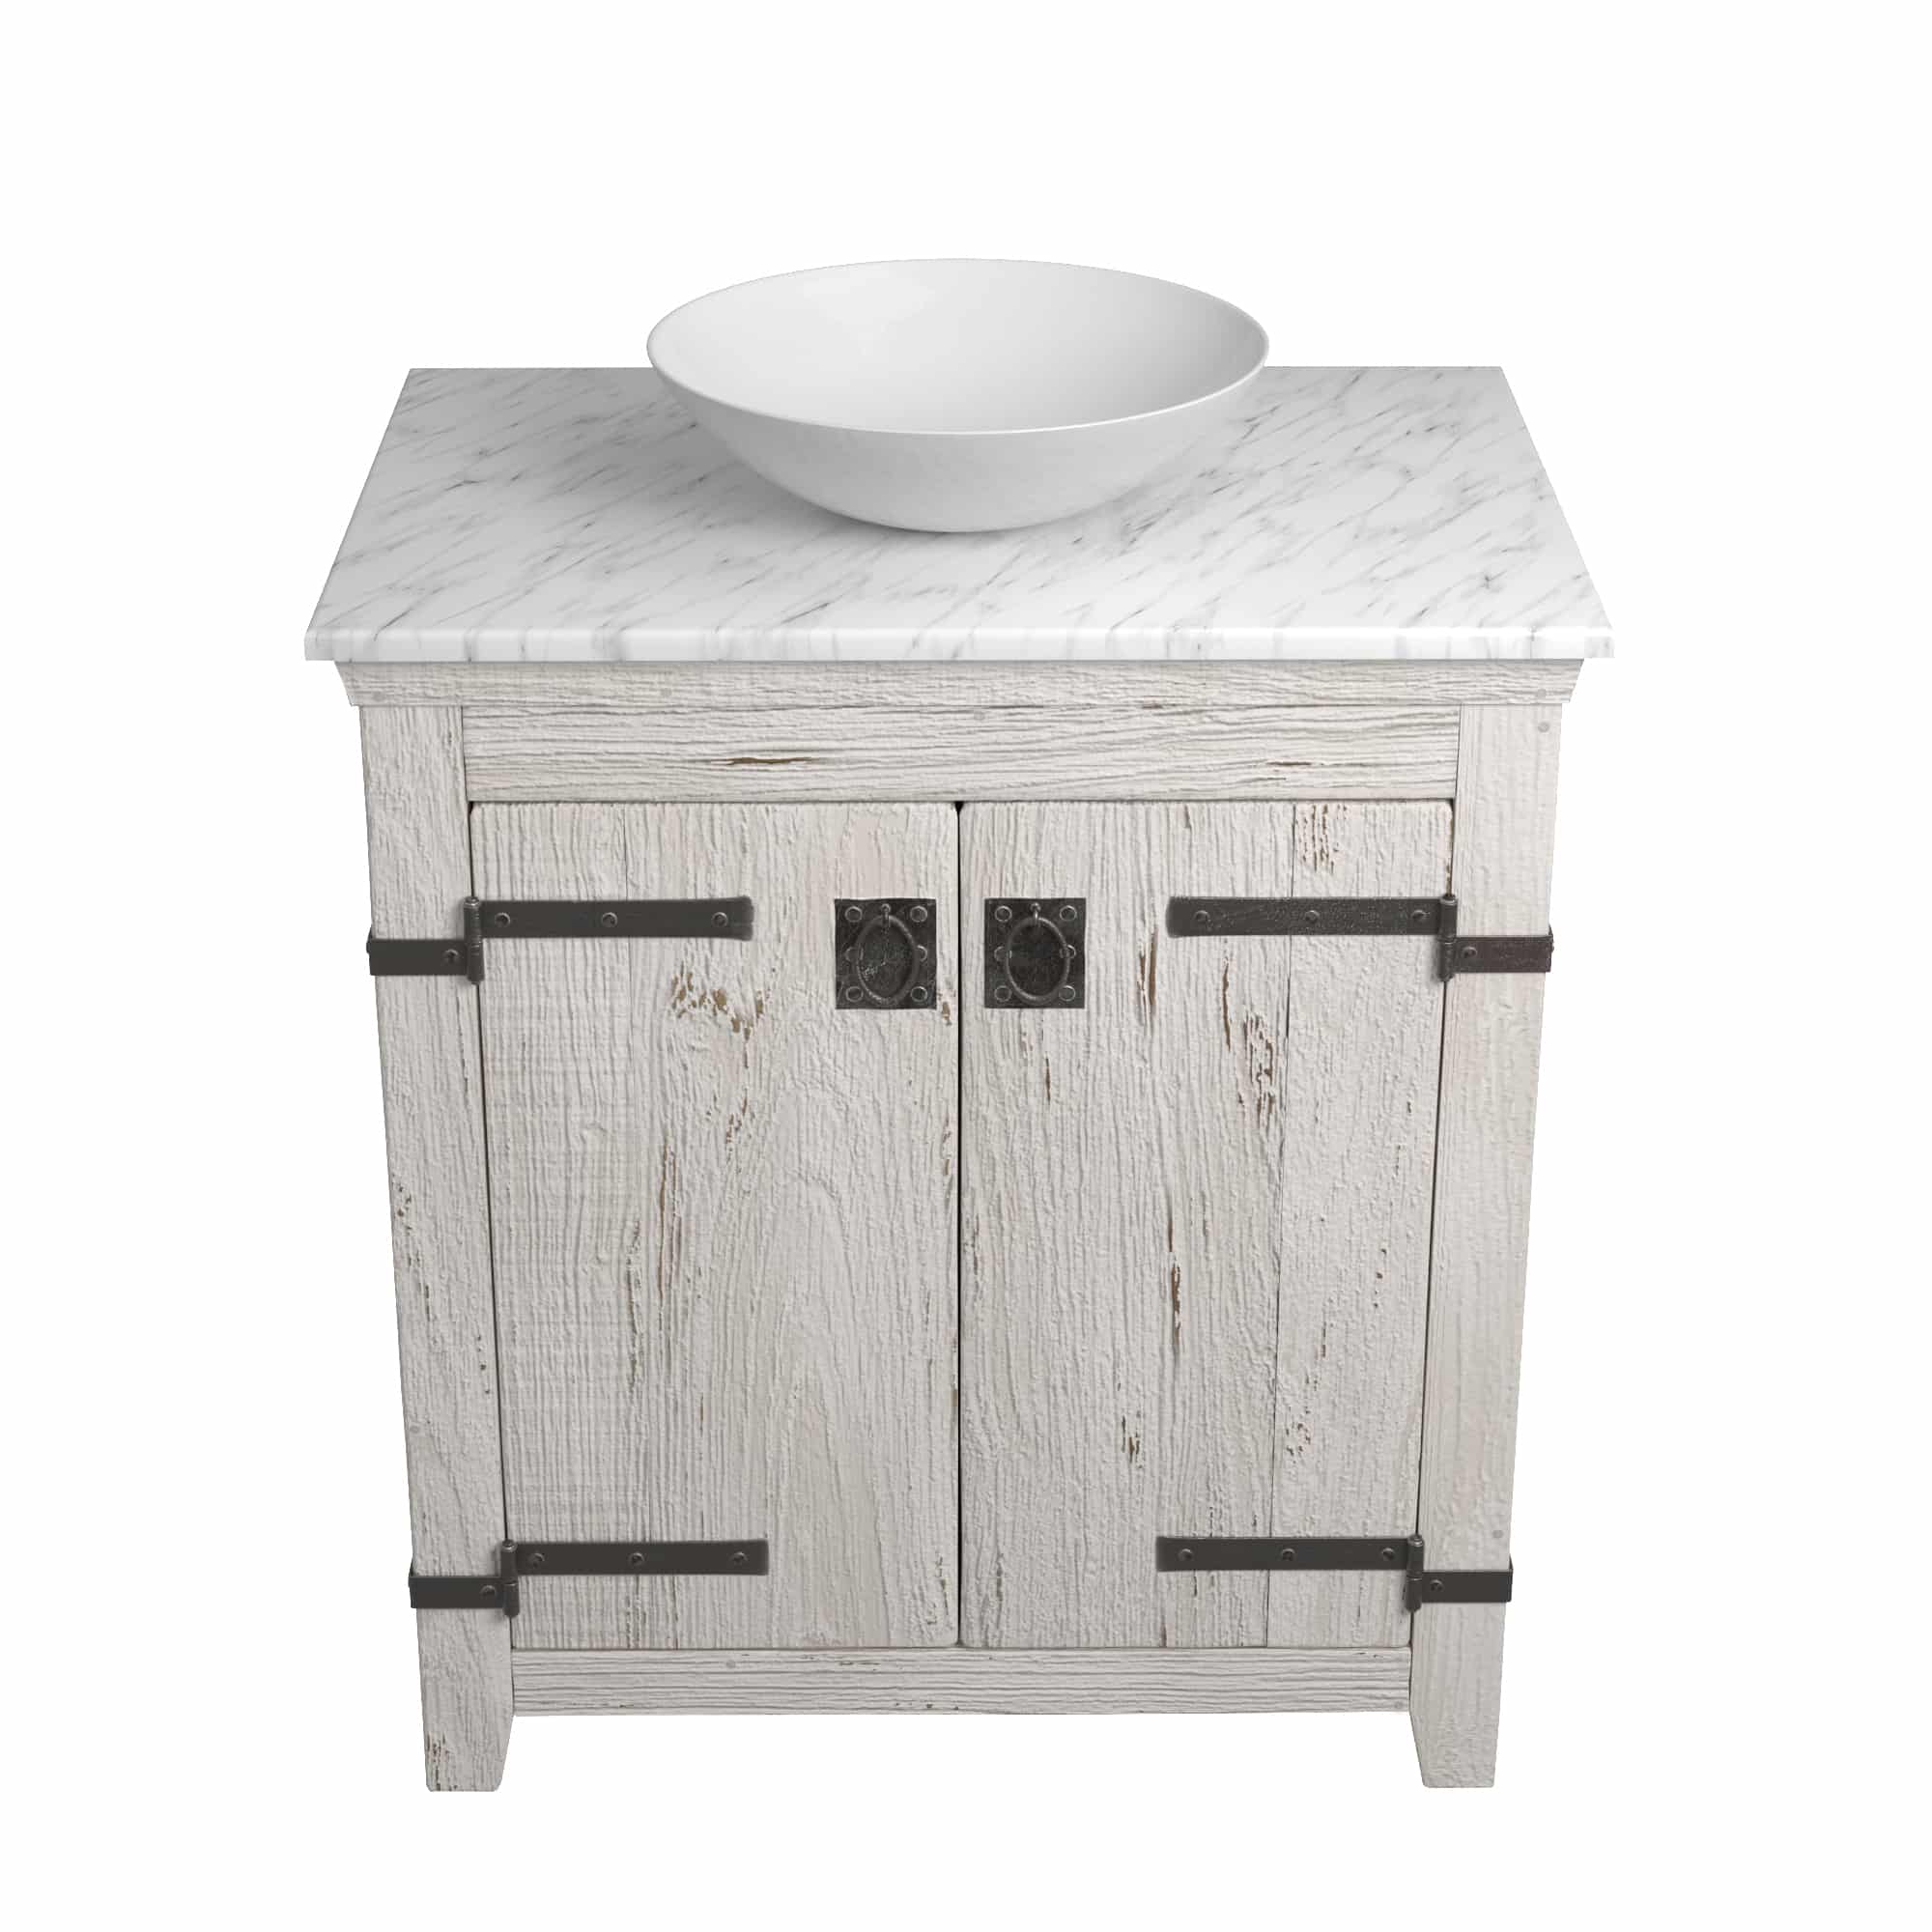 Native Trails 30" Americana Vanity in Whitewash with Carrara Marble Top and Verona in Abalone, Single Faucet Hole, BND30-VB-CT-MG-057